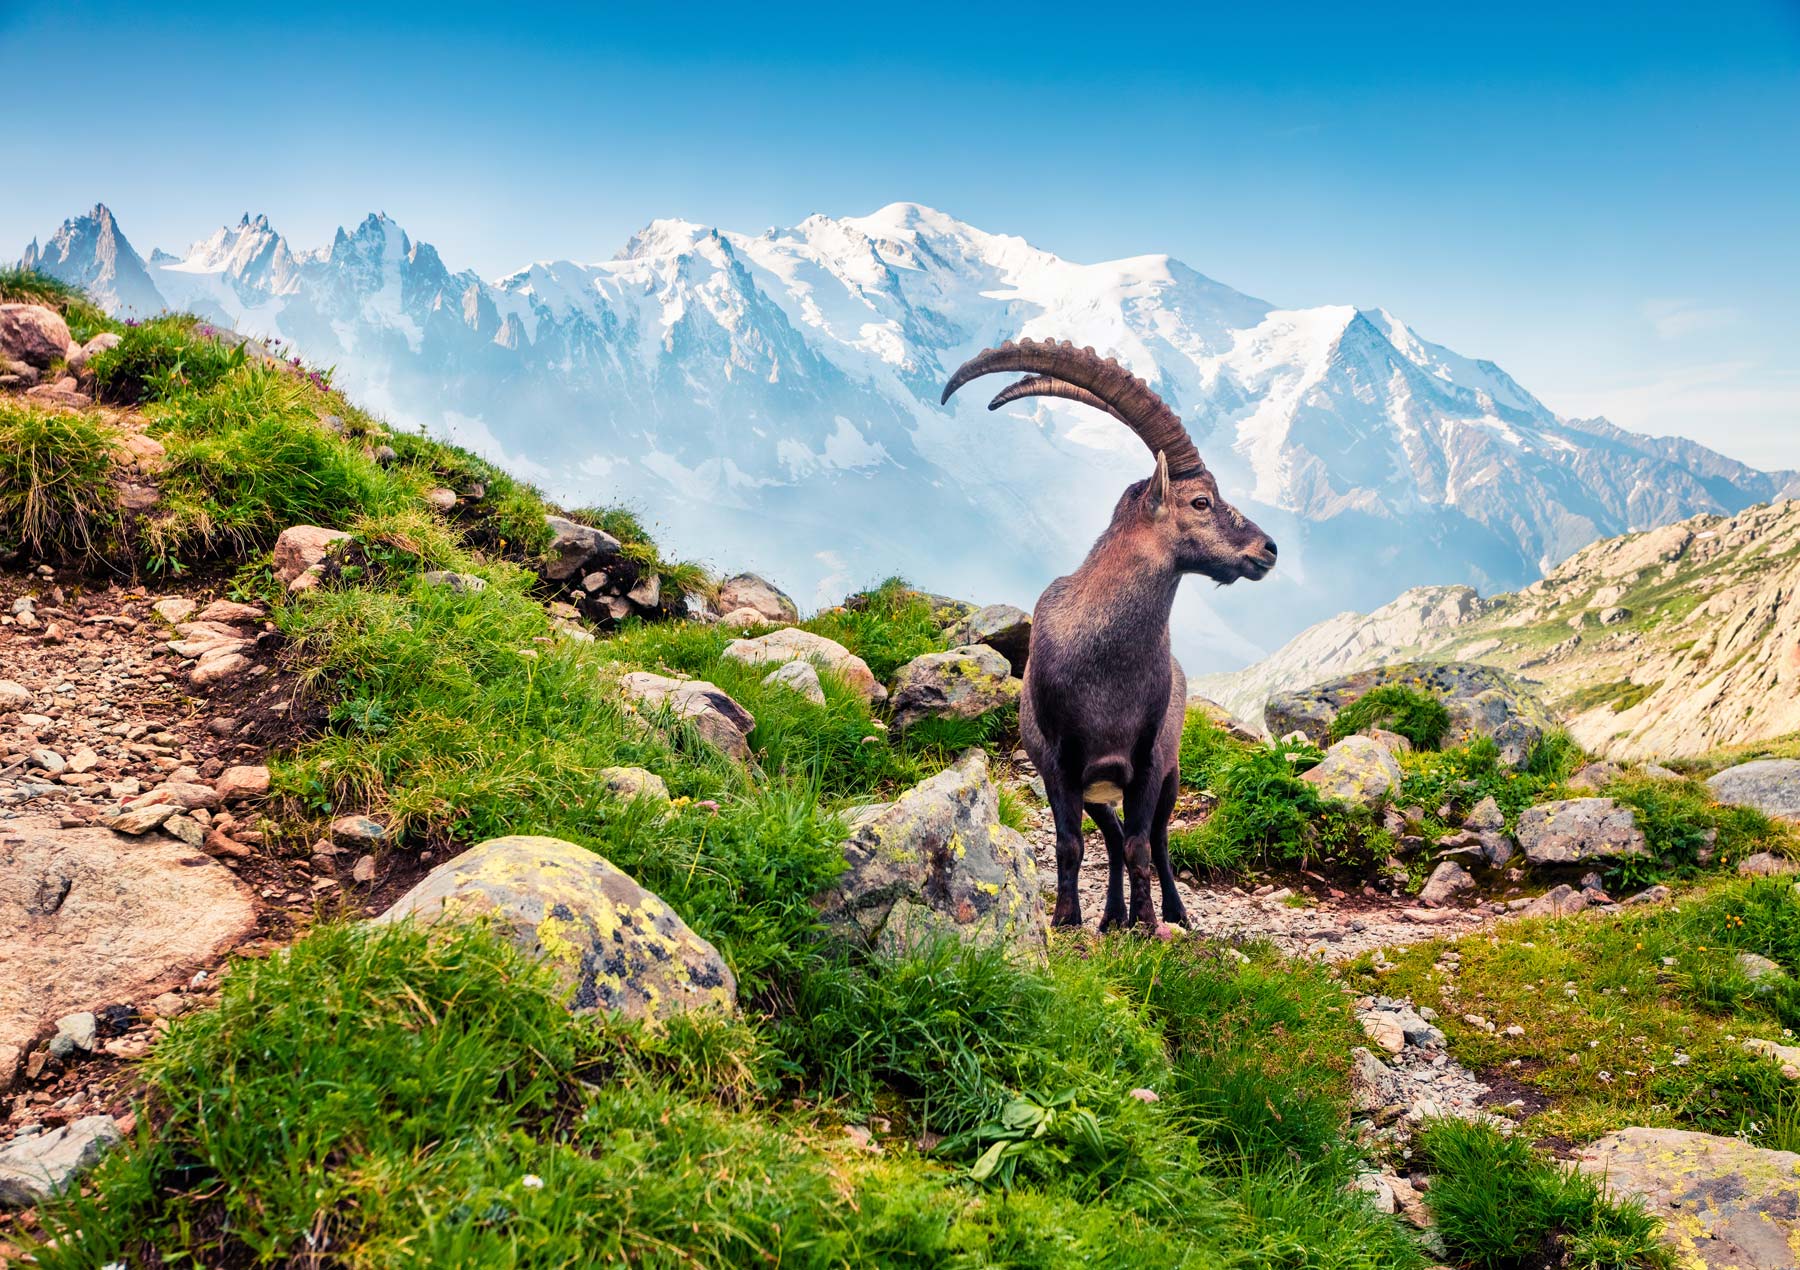 Image of the Alpine Ibex with Mont Blanc in the background